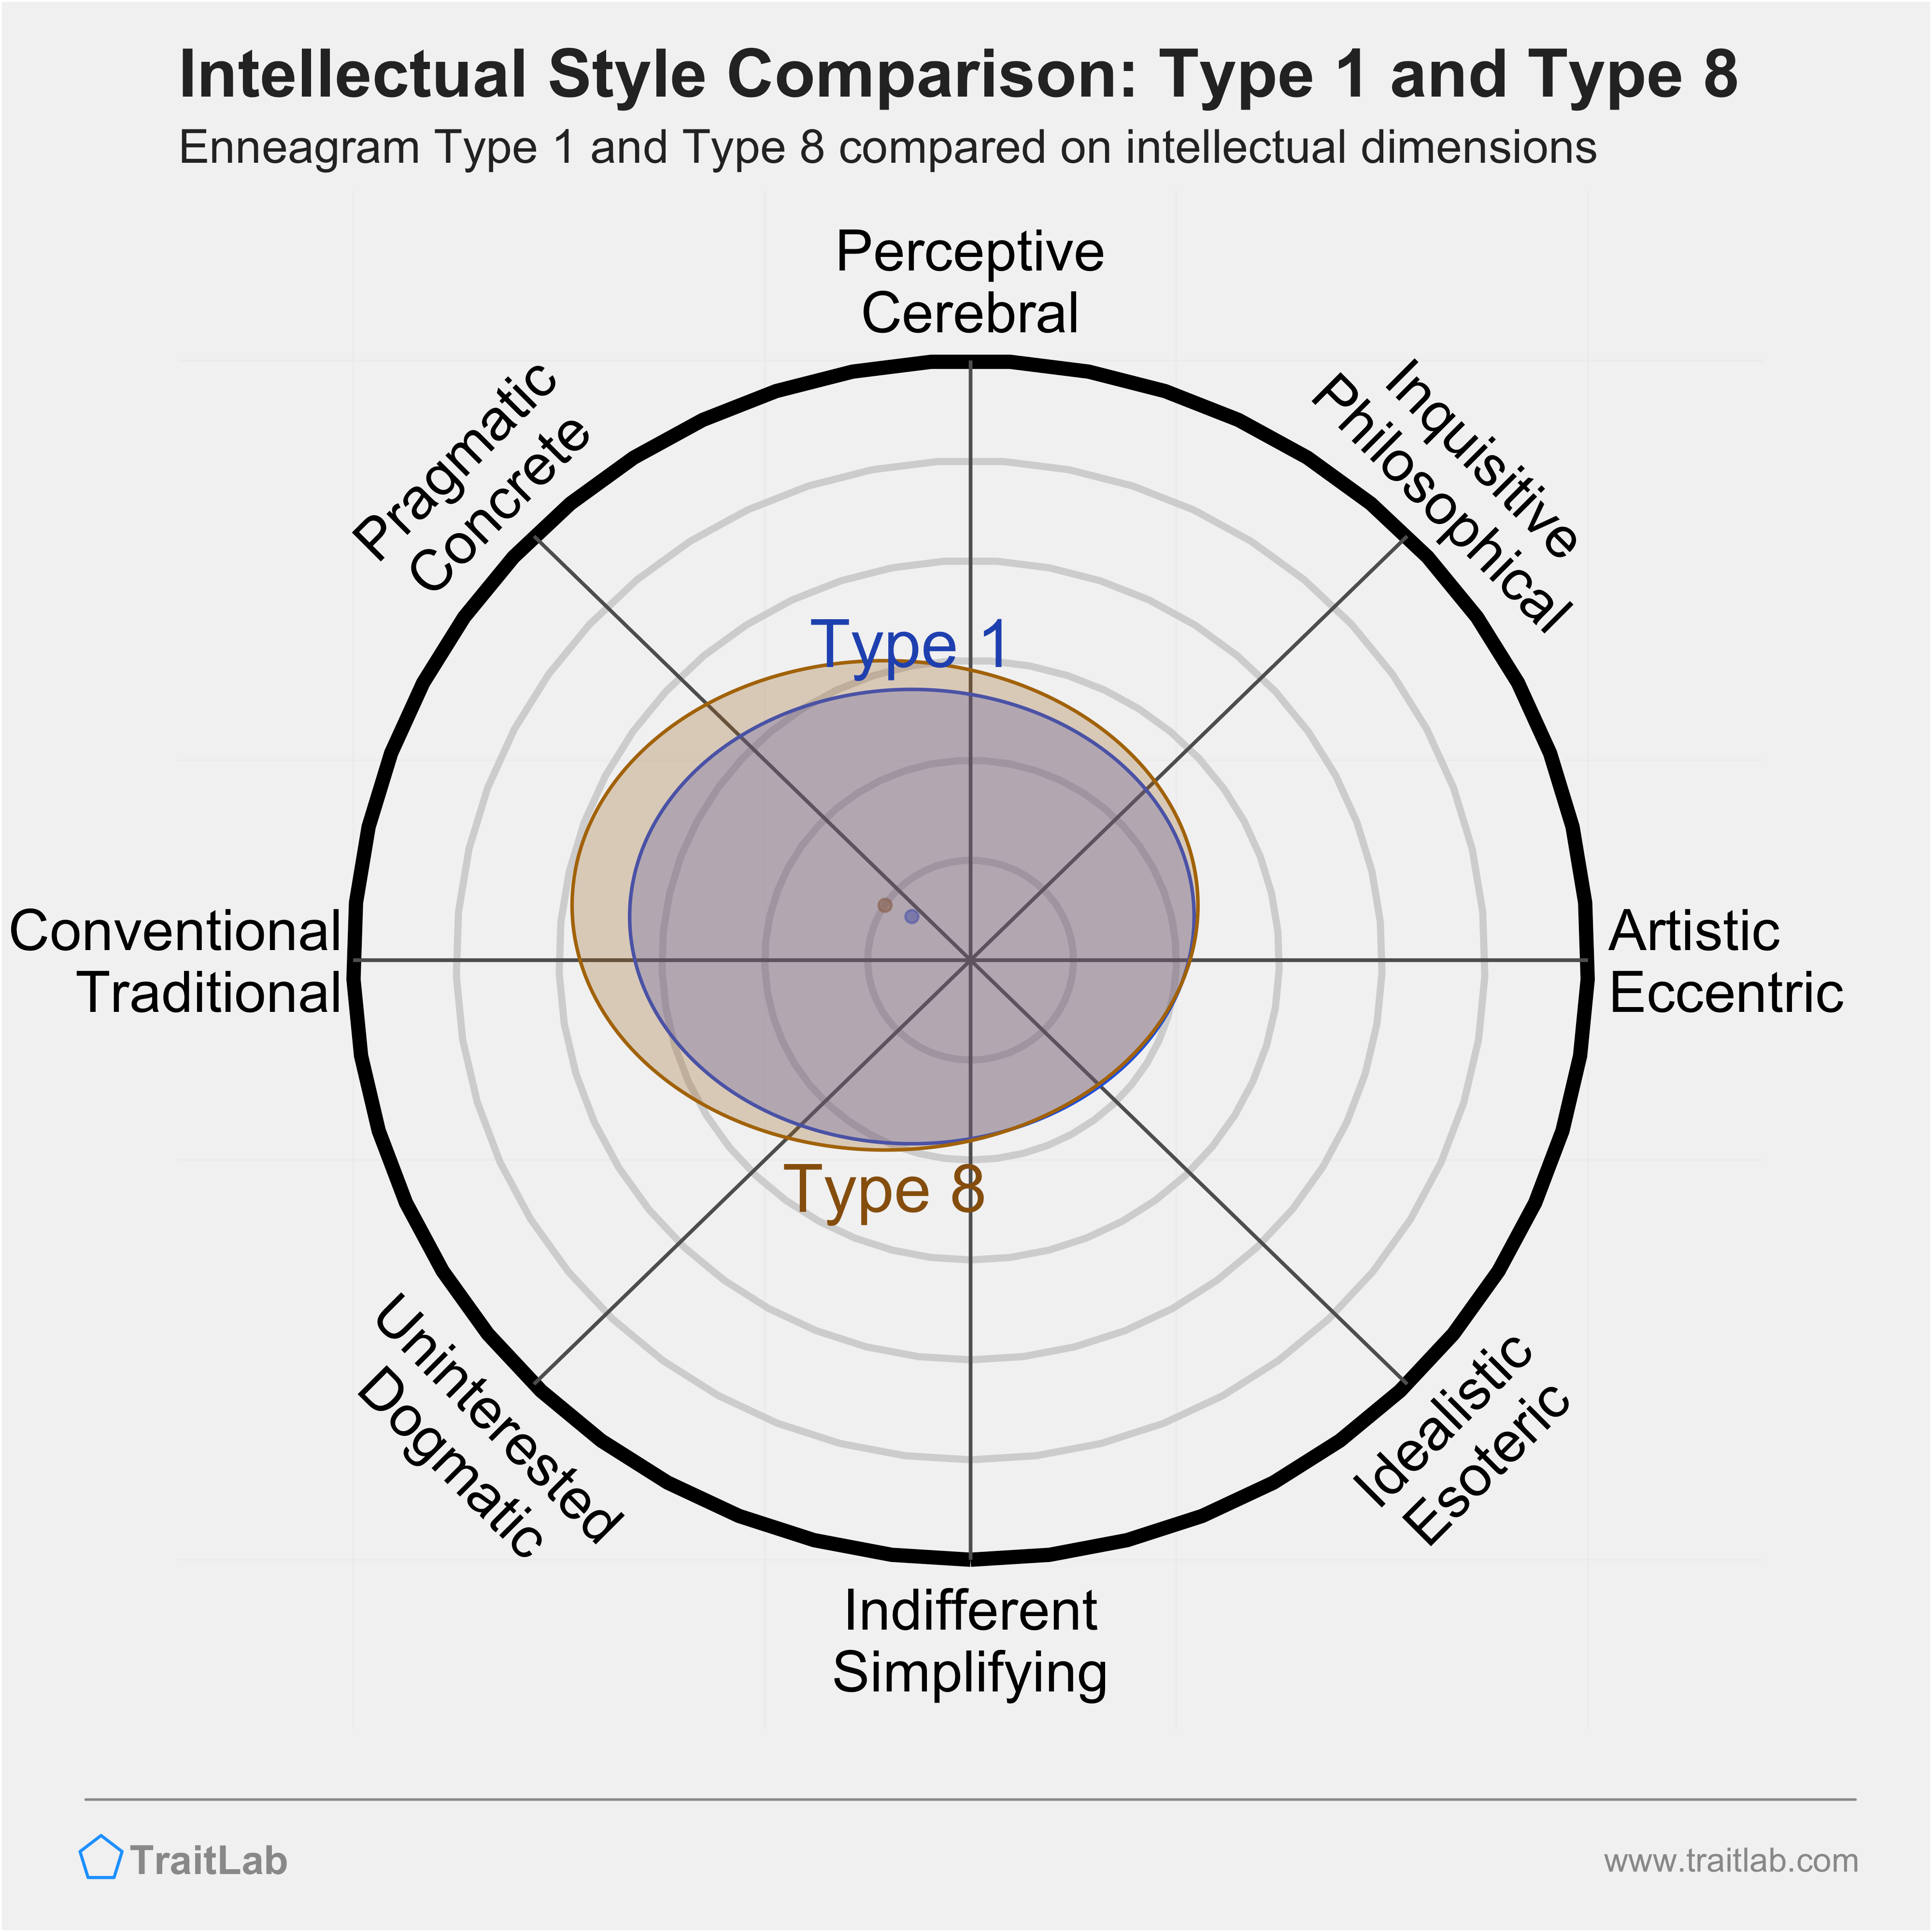 Type 1 and Type 8 comparison across intellectual dimensions